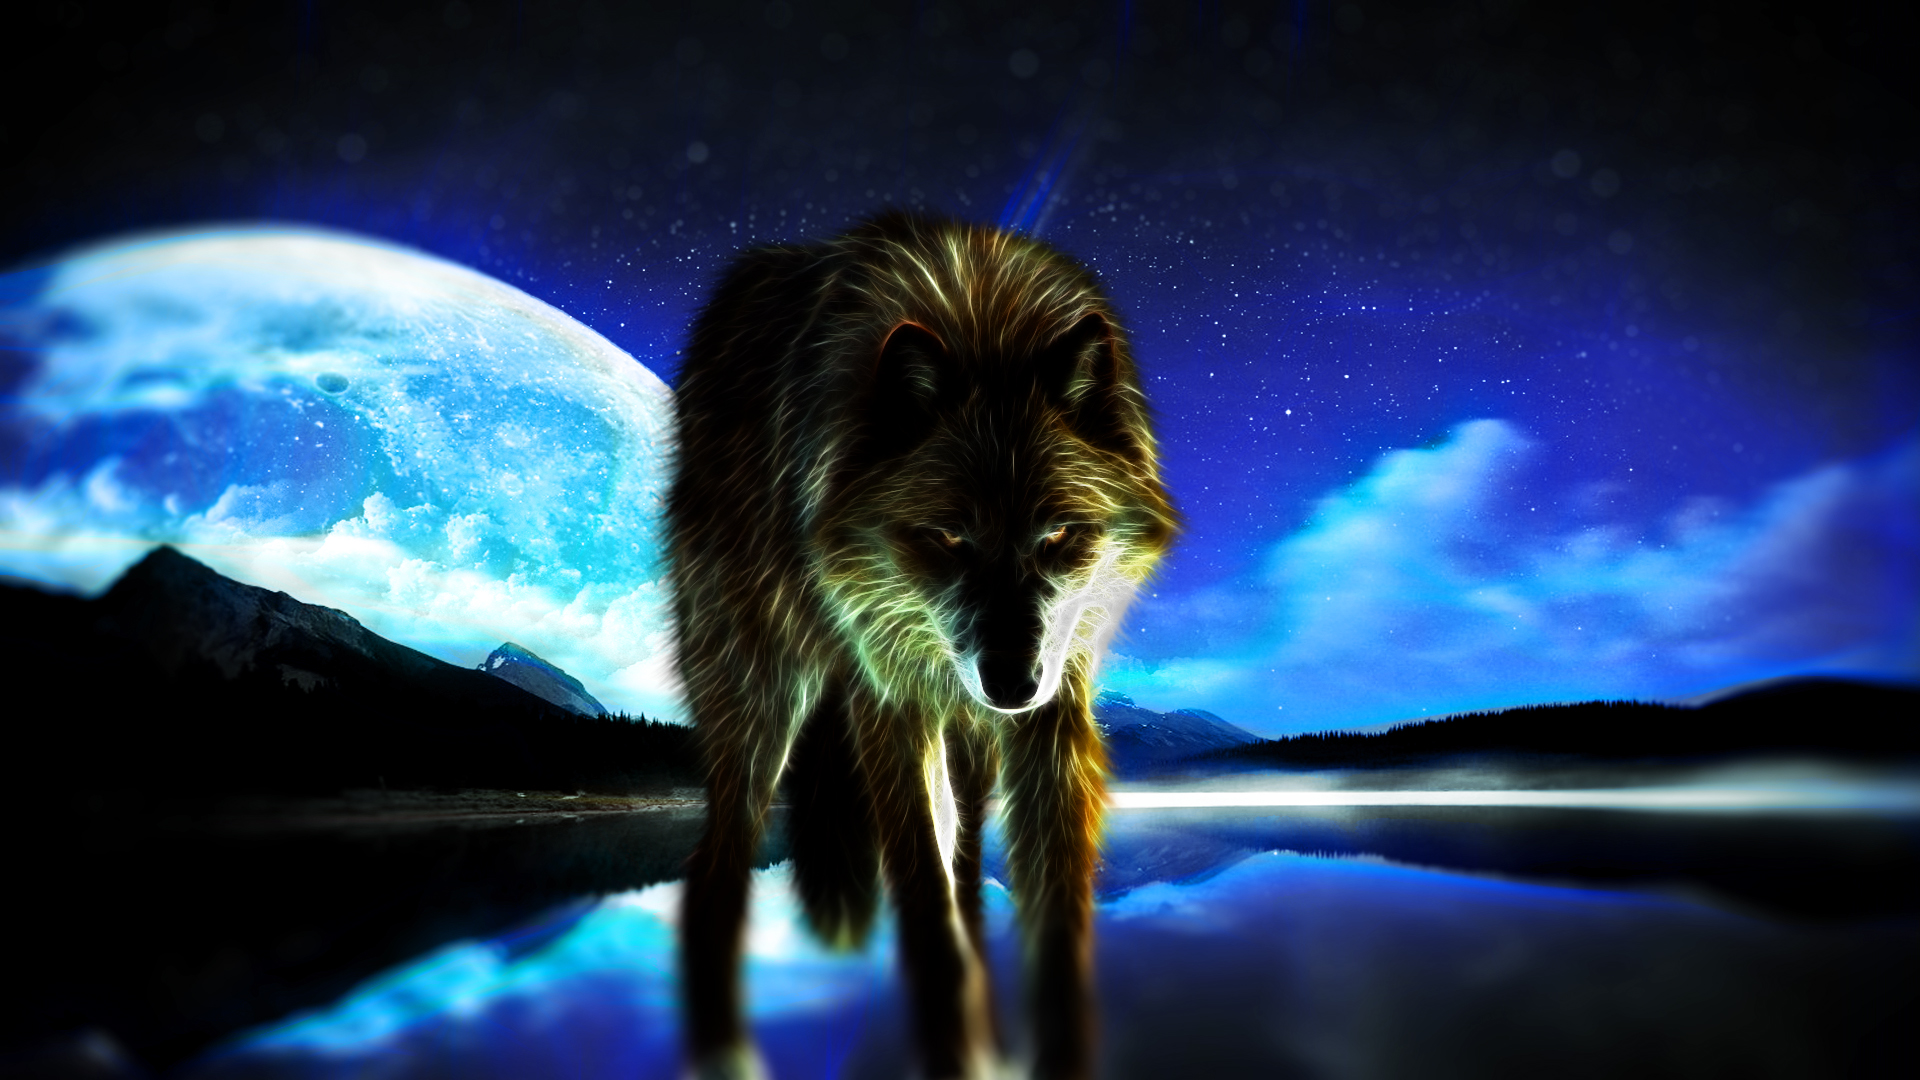 Wolf with Moon (Wallpaper) by Hardii on DeviantArt